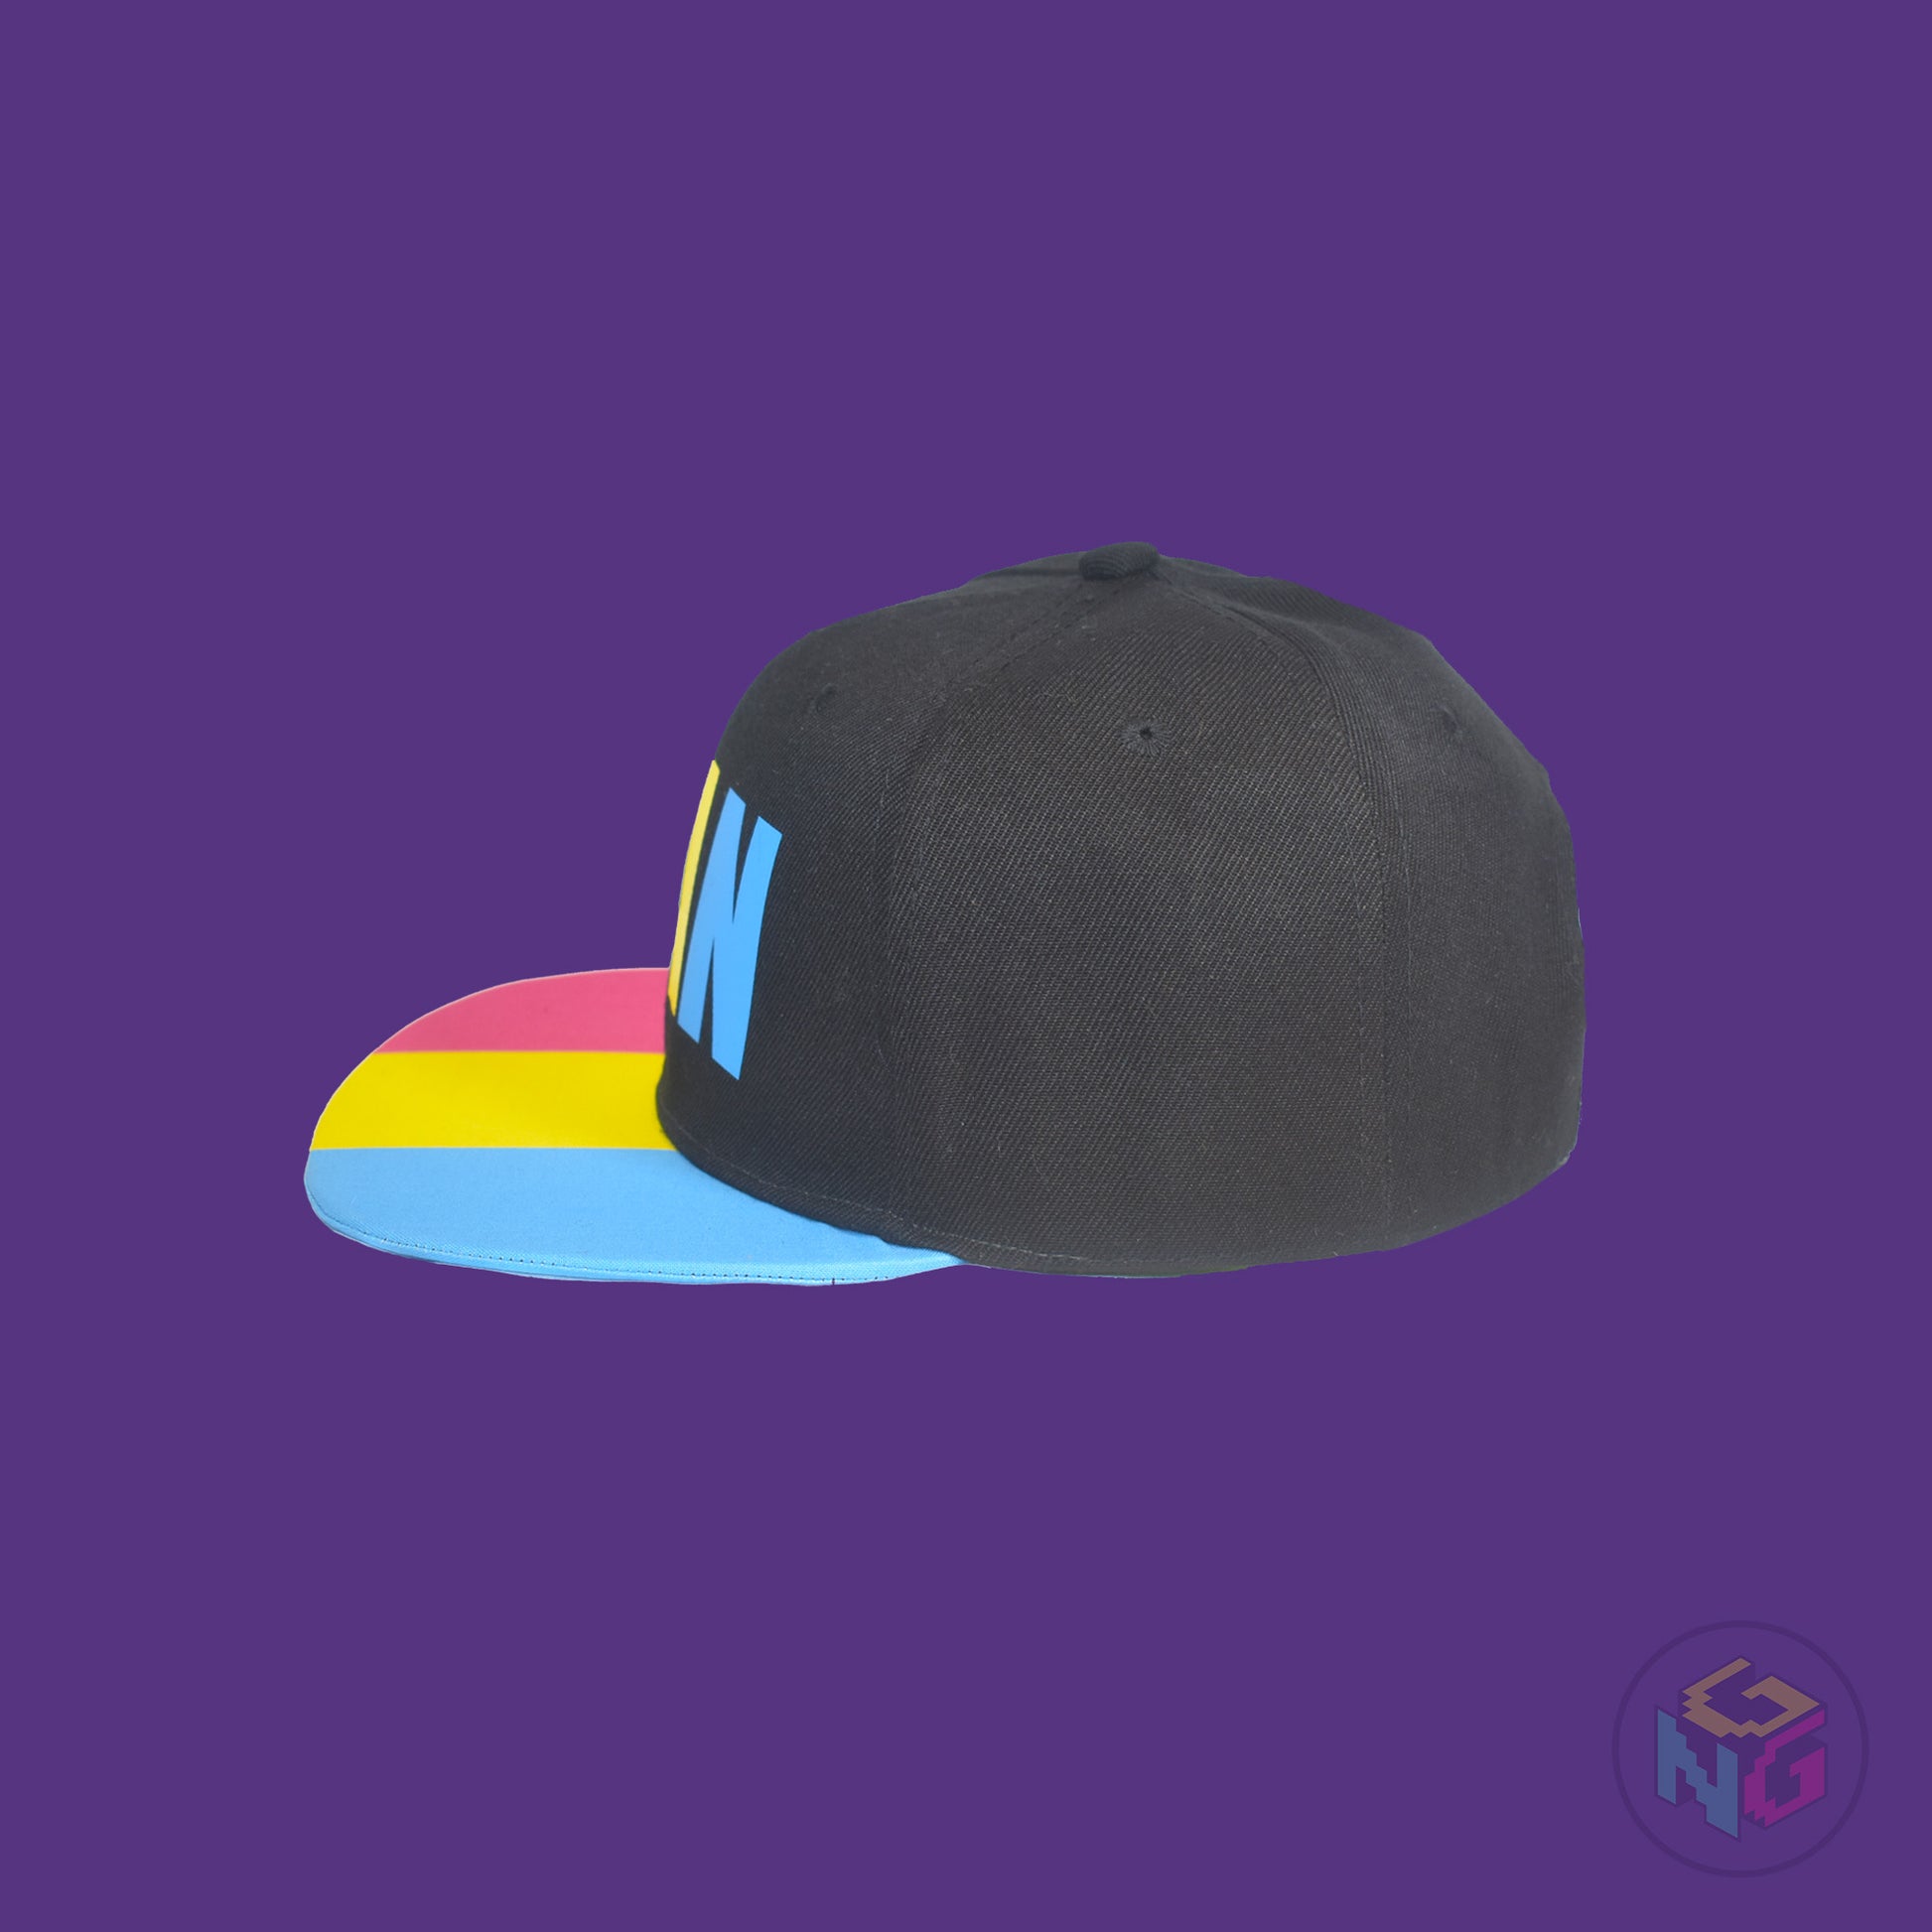 Black flat bill snapback hat. The brim has the pansexual pride flag on both sides and the front of the hat has the word “PAN” in pink, yellow, and blue letters. Left view